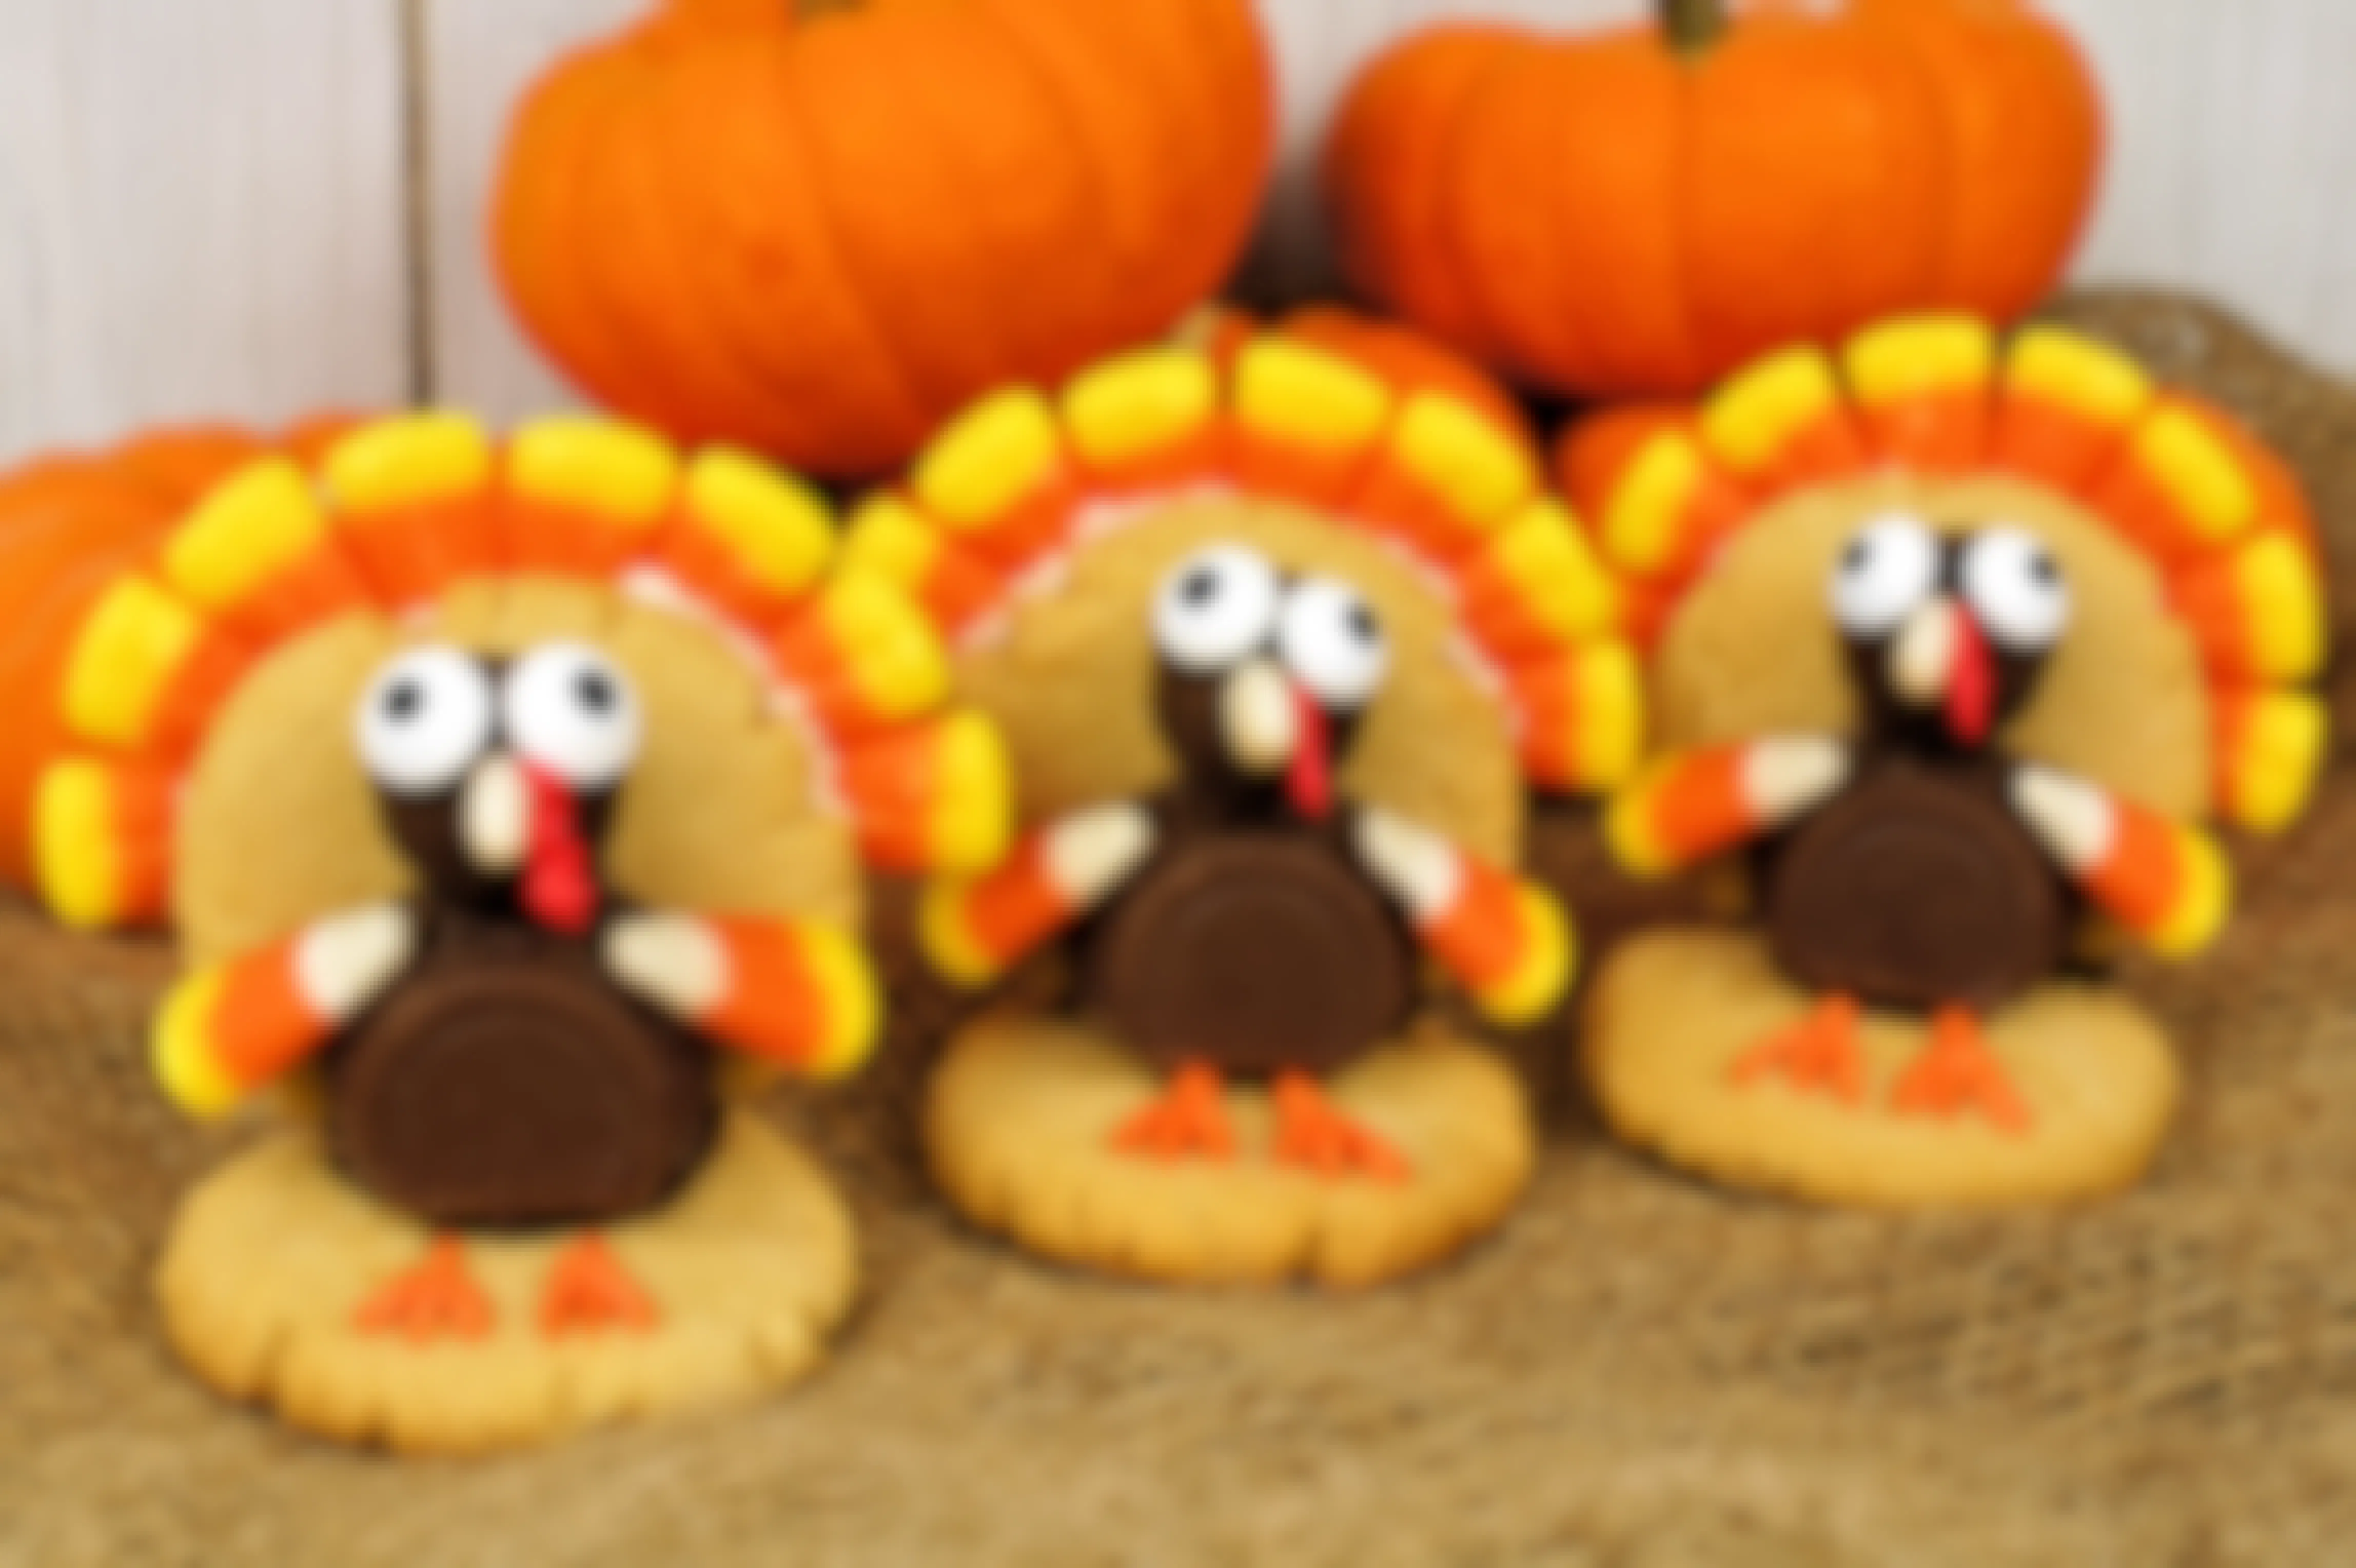 Three turkey-shaped cookies made with leftover Halloween candy on a table with some pumpkins.